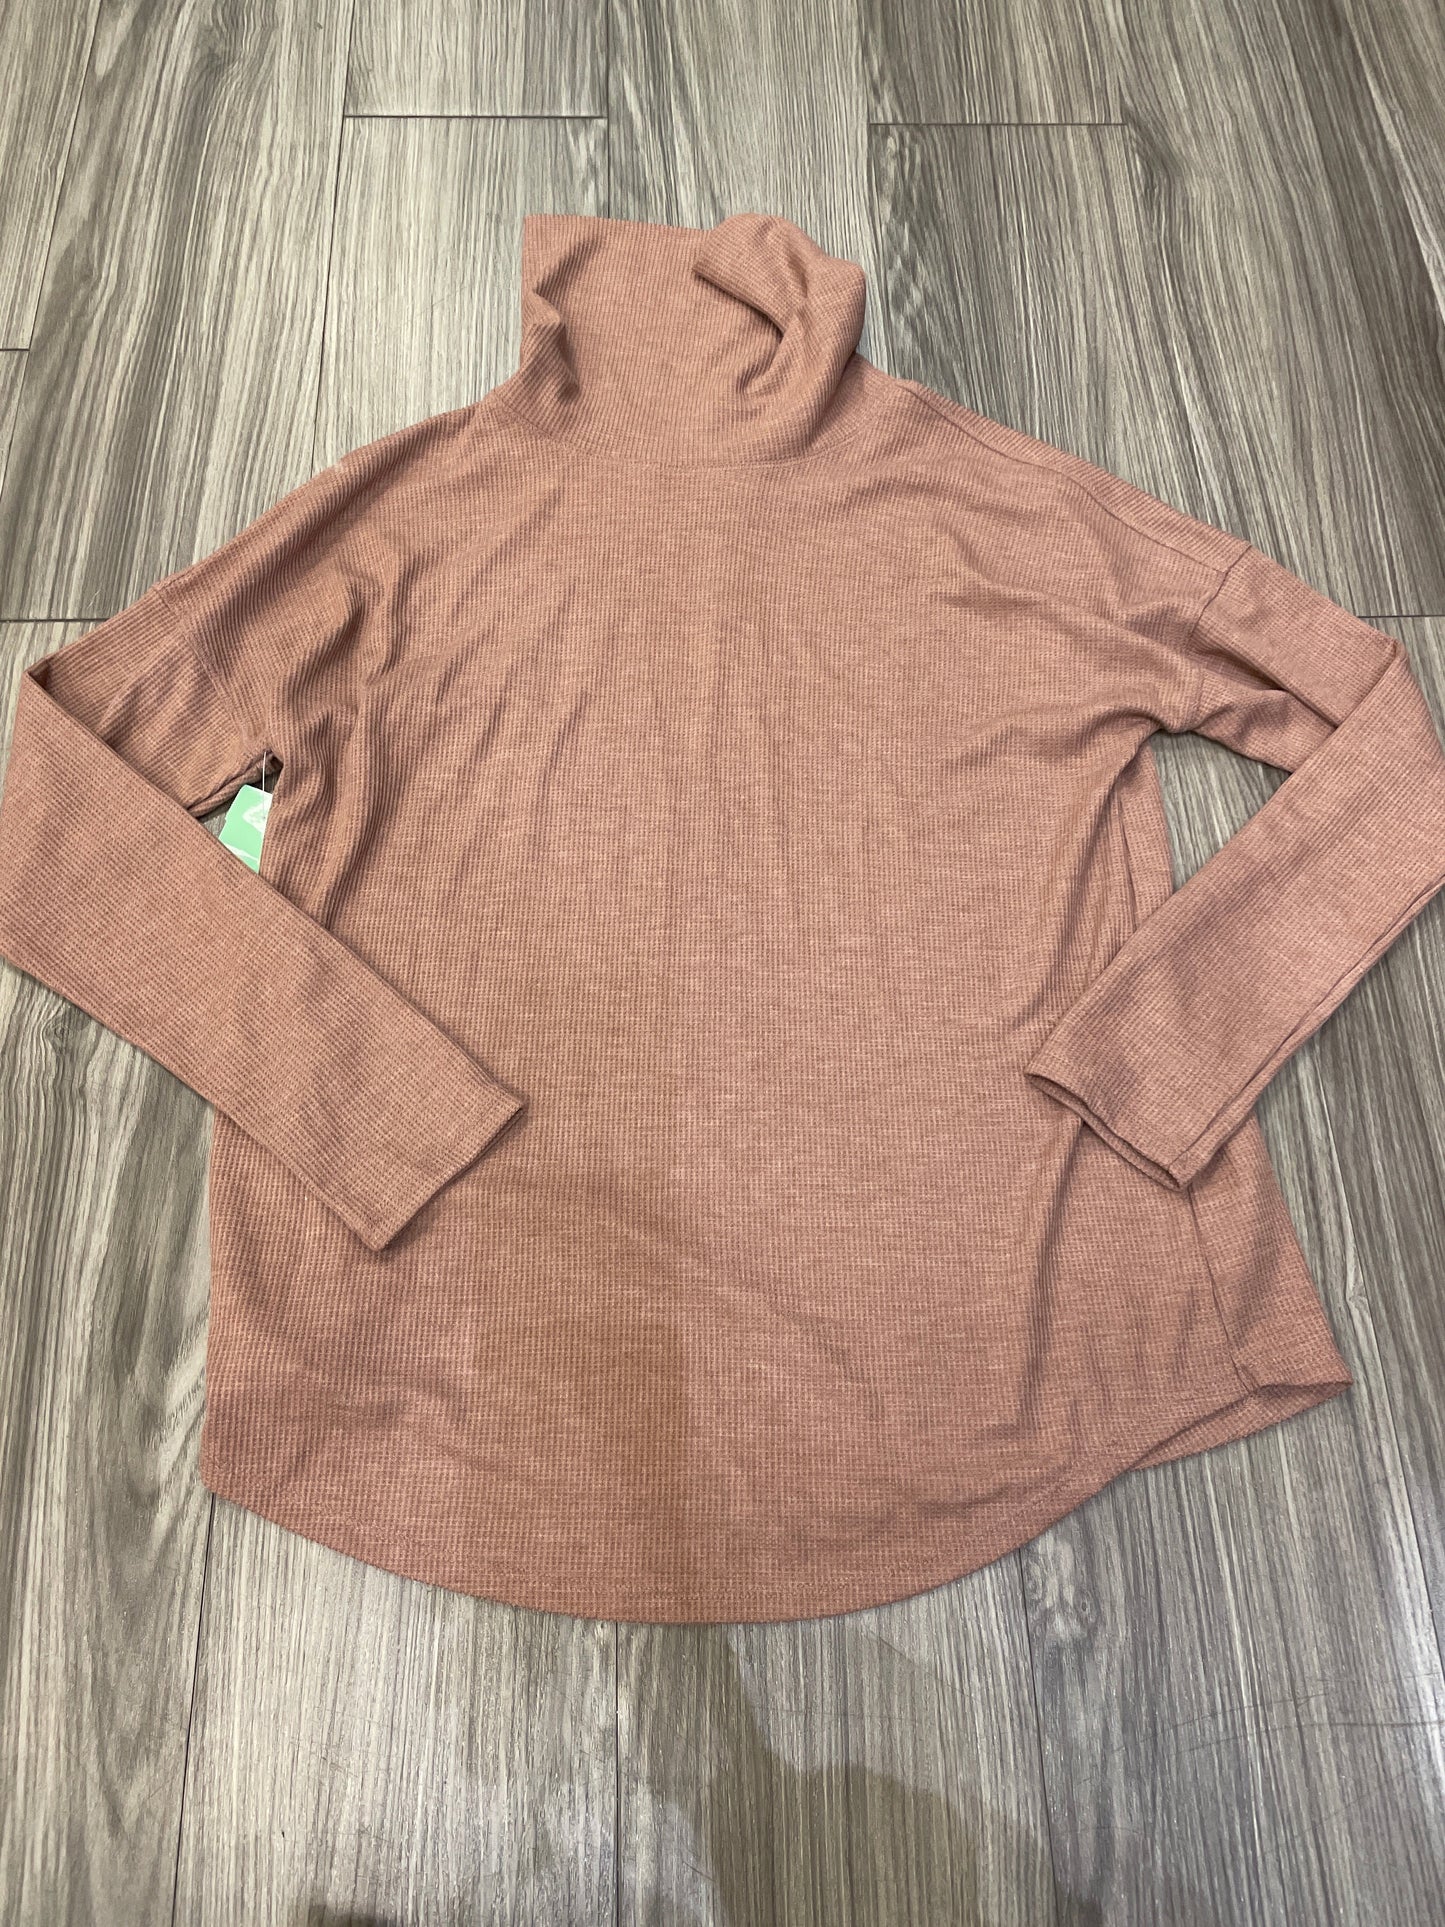 Brown Sweatshirt Collar A New Day, Size S